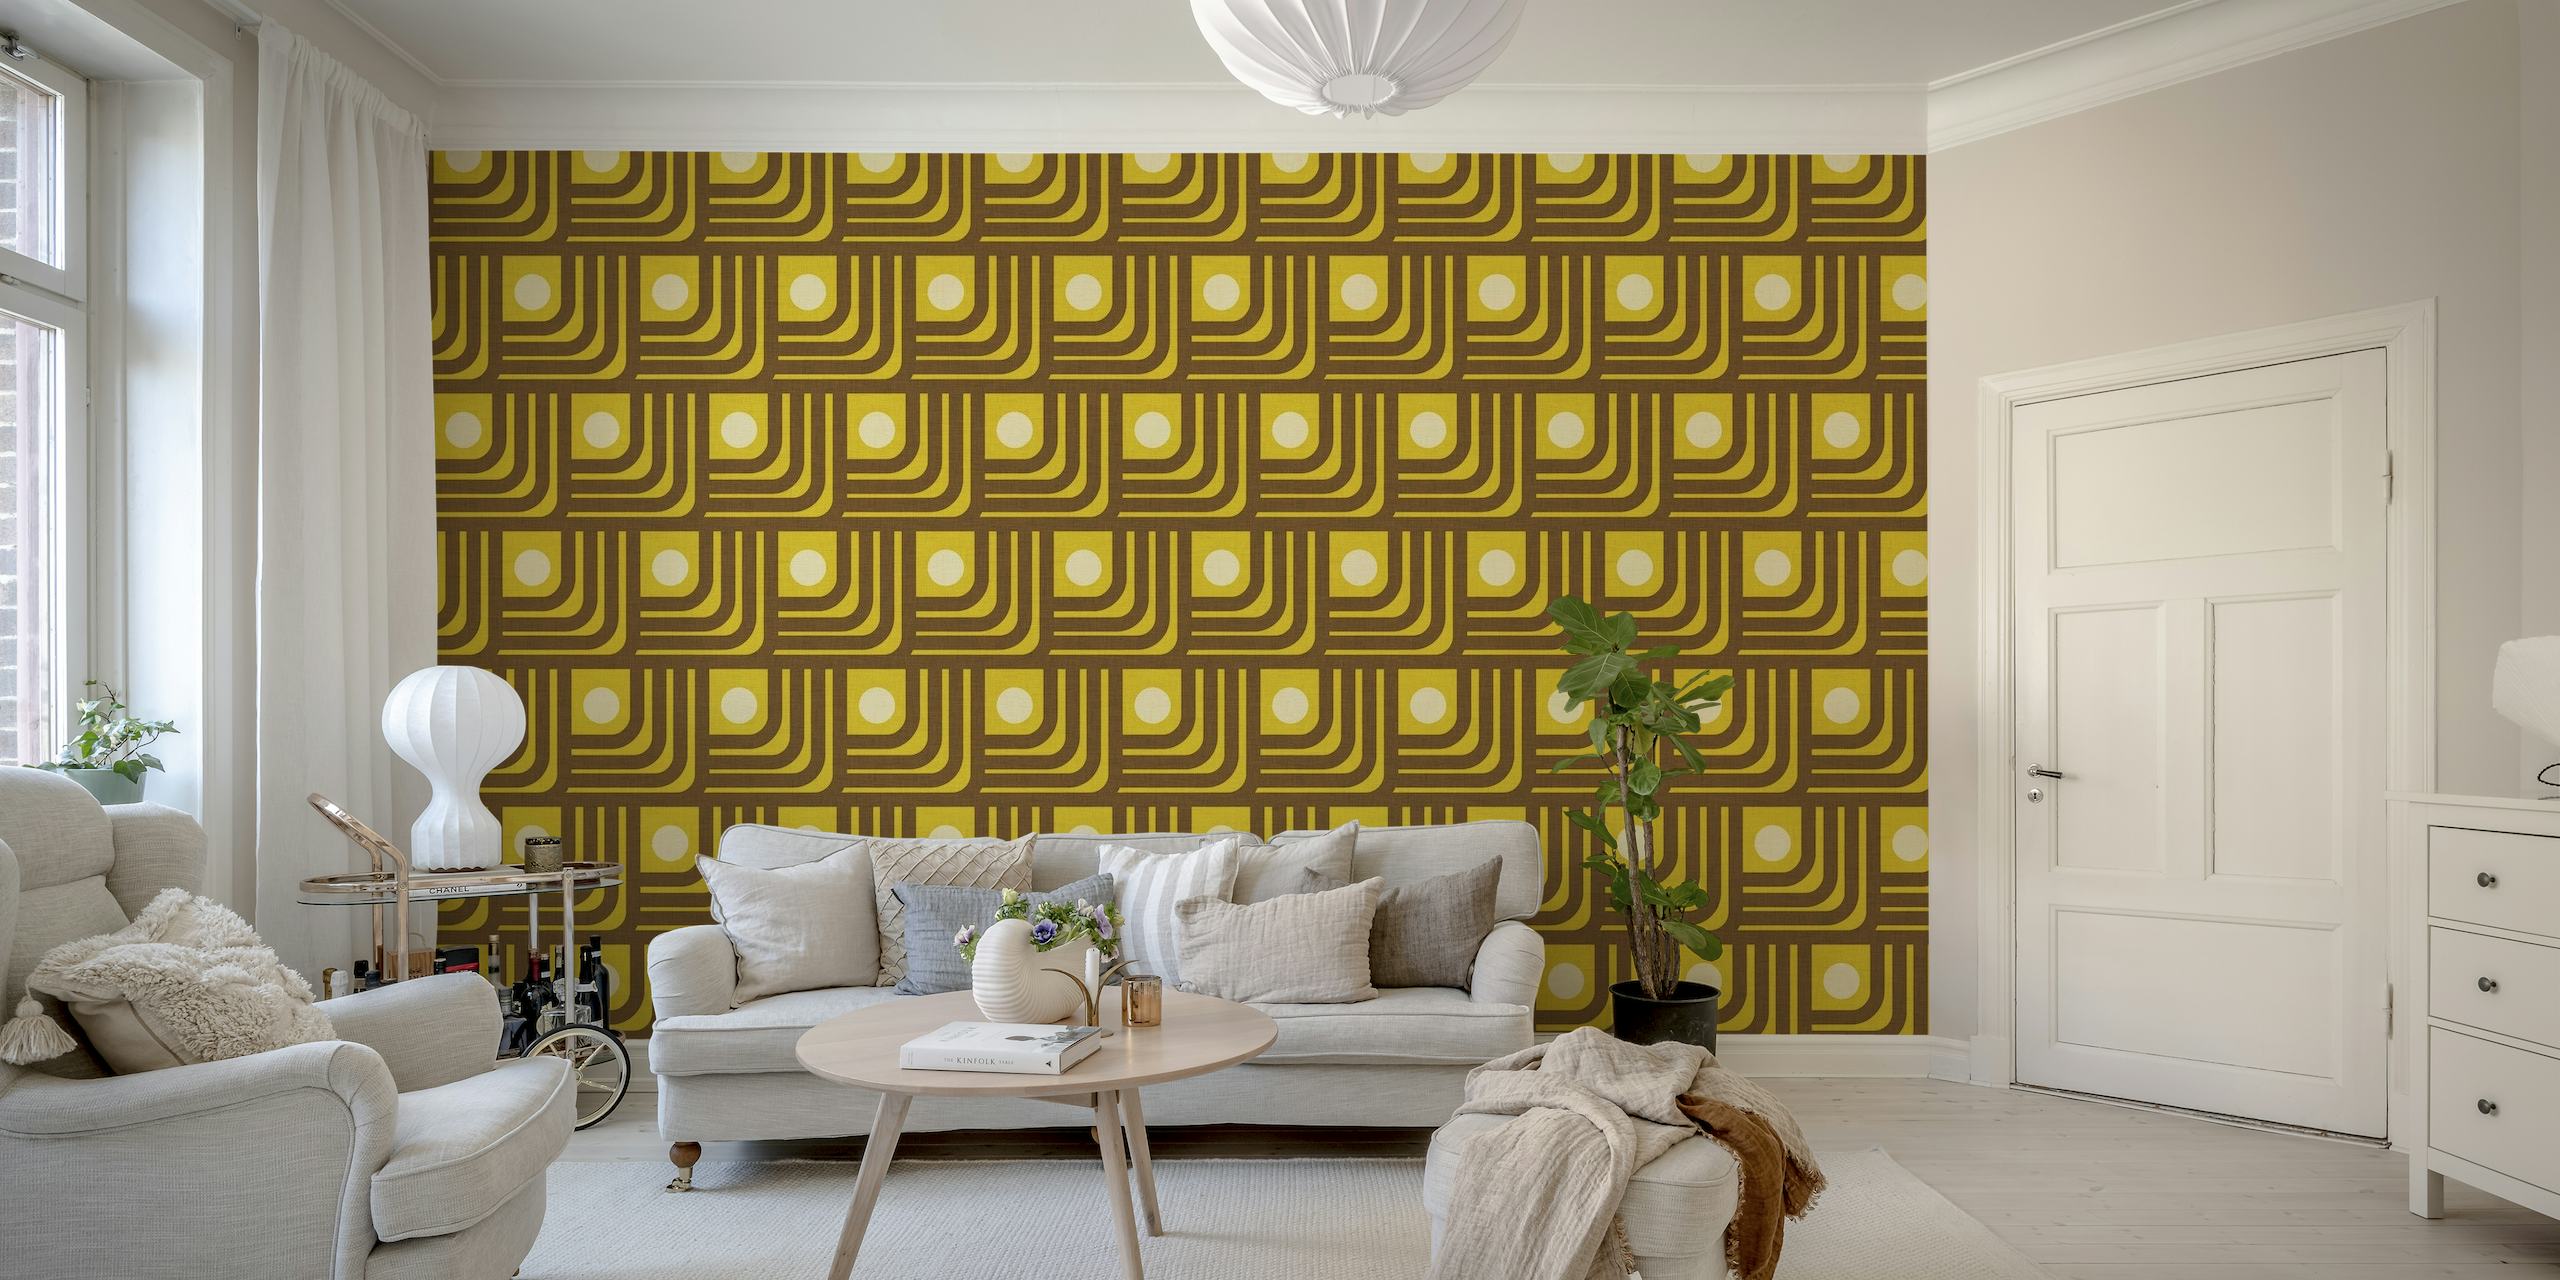 70s-inspired avocado green wall mural with curved lines and geometric squares